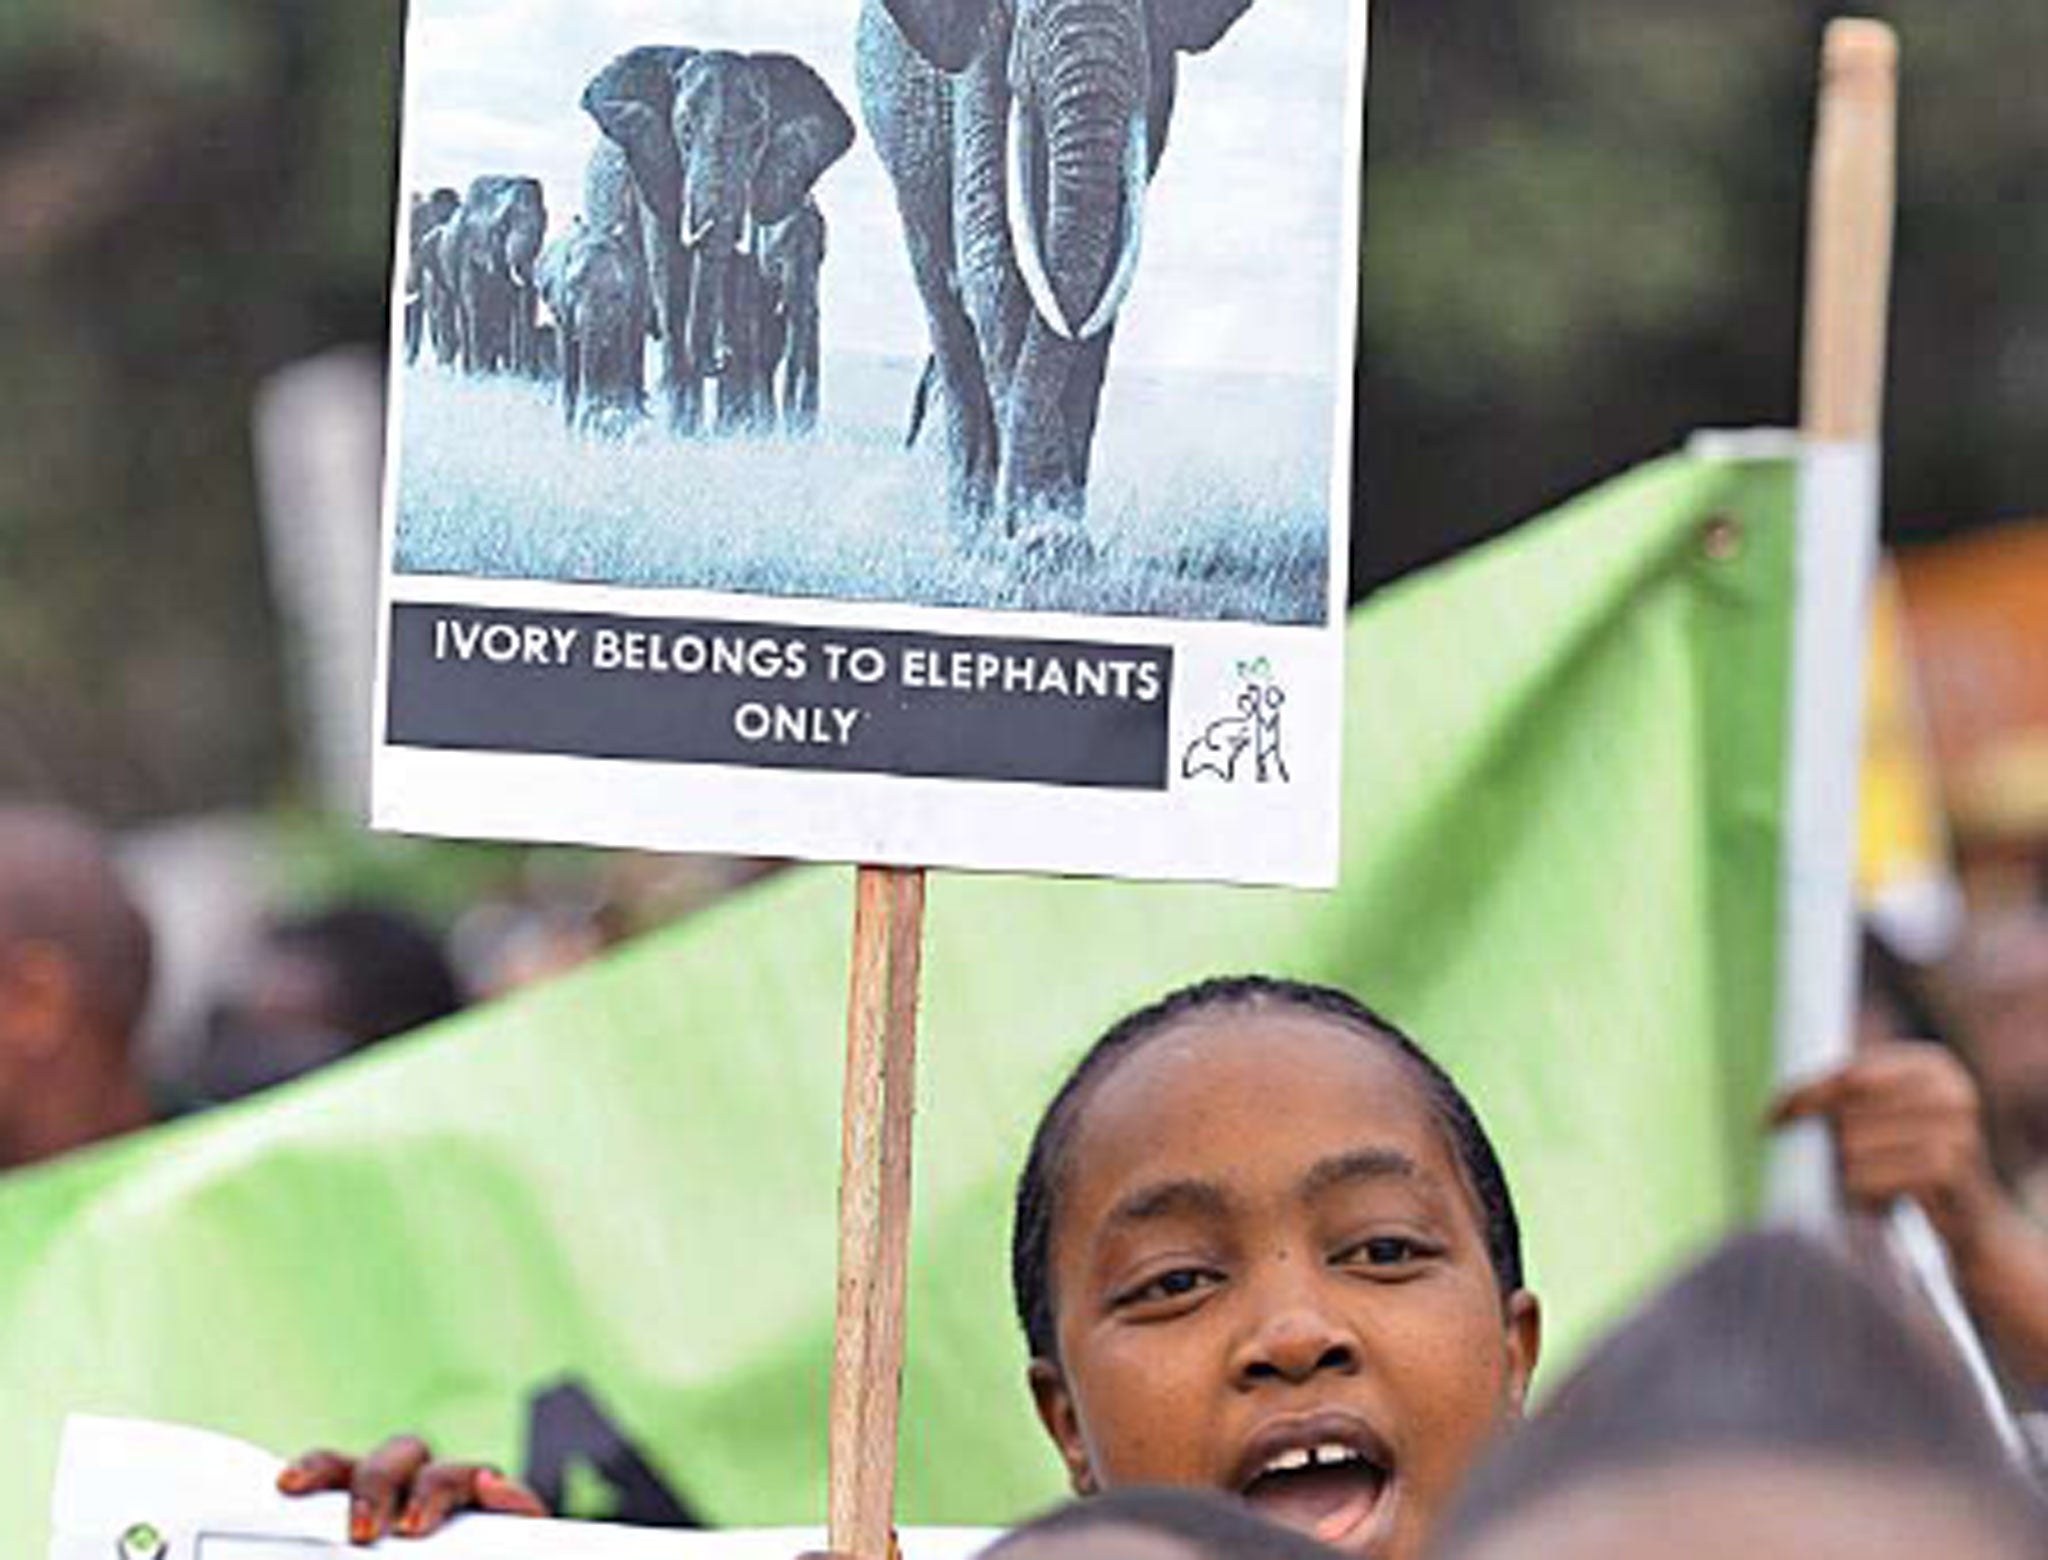 Wildlife conservationists take to the streets of Nairobi as part of
an awareness campaign dubbed ‘Ivory Belongs to Elephants’